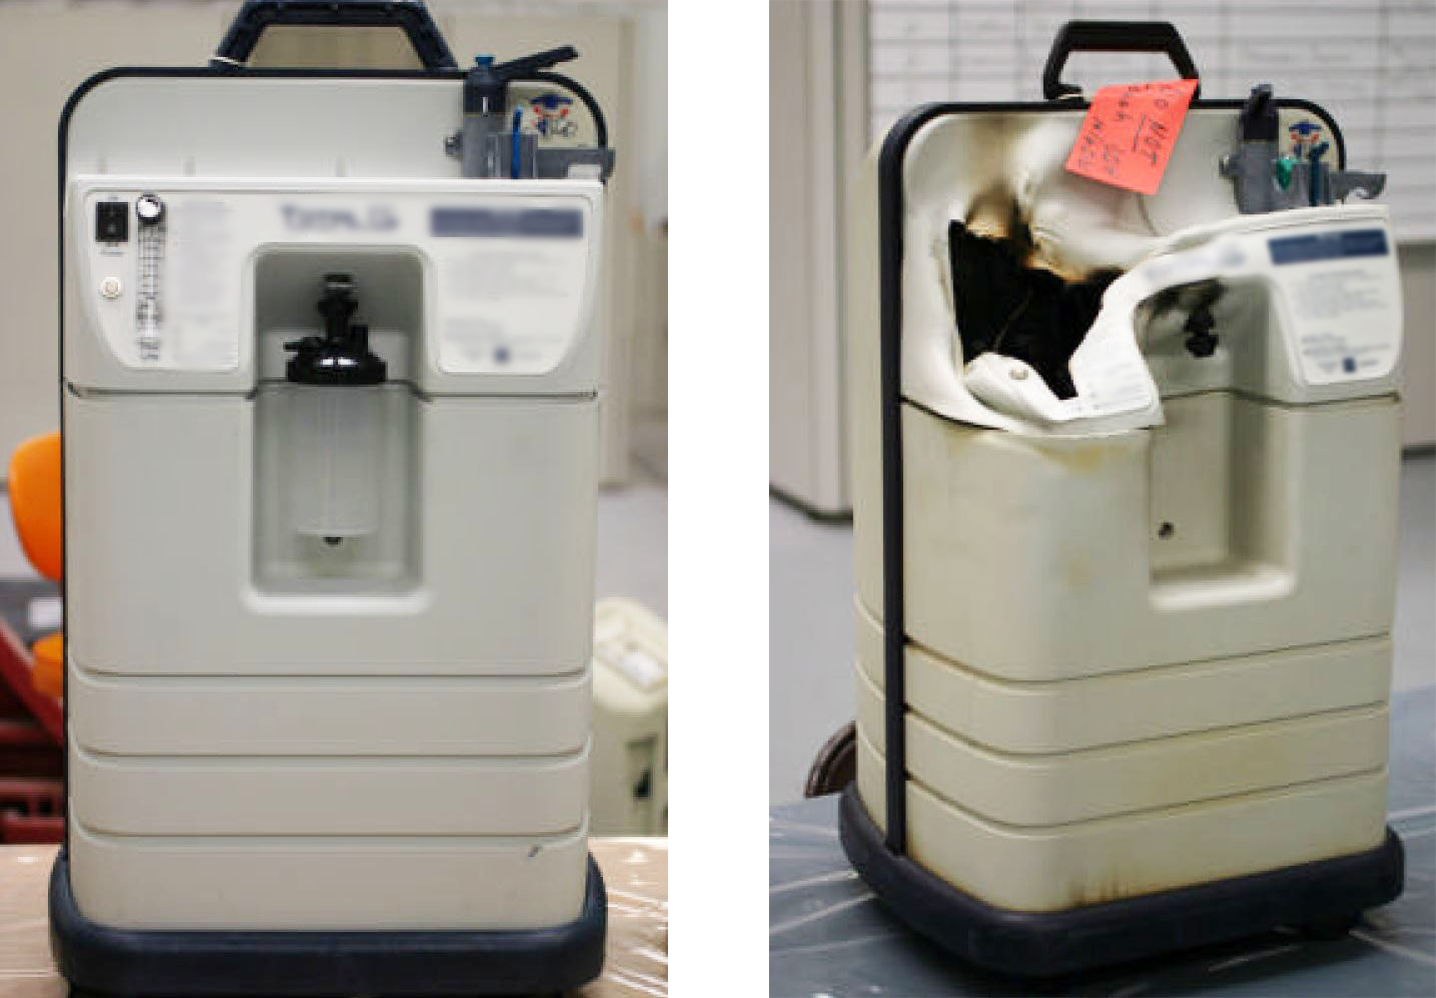 two images of a home oxygen concentrator, one in tact and another after oxygen fire